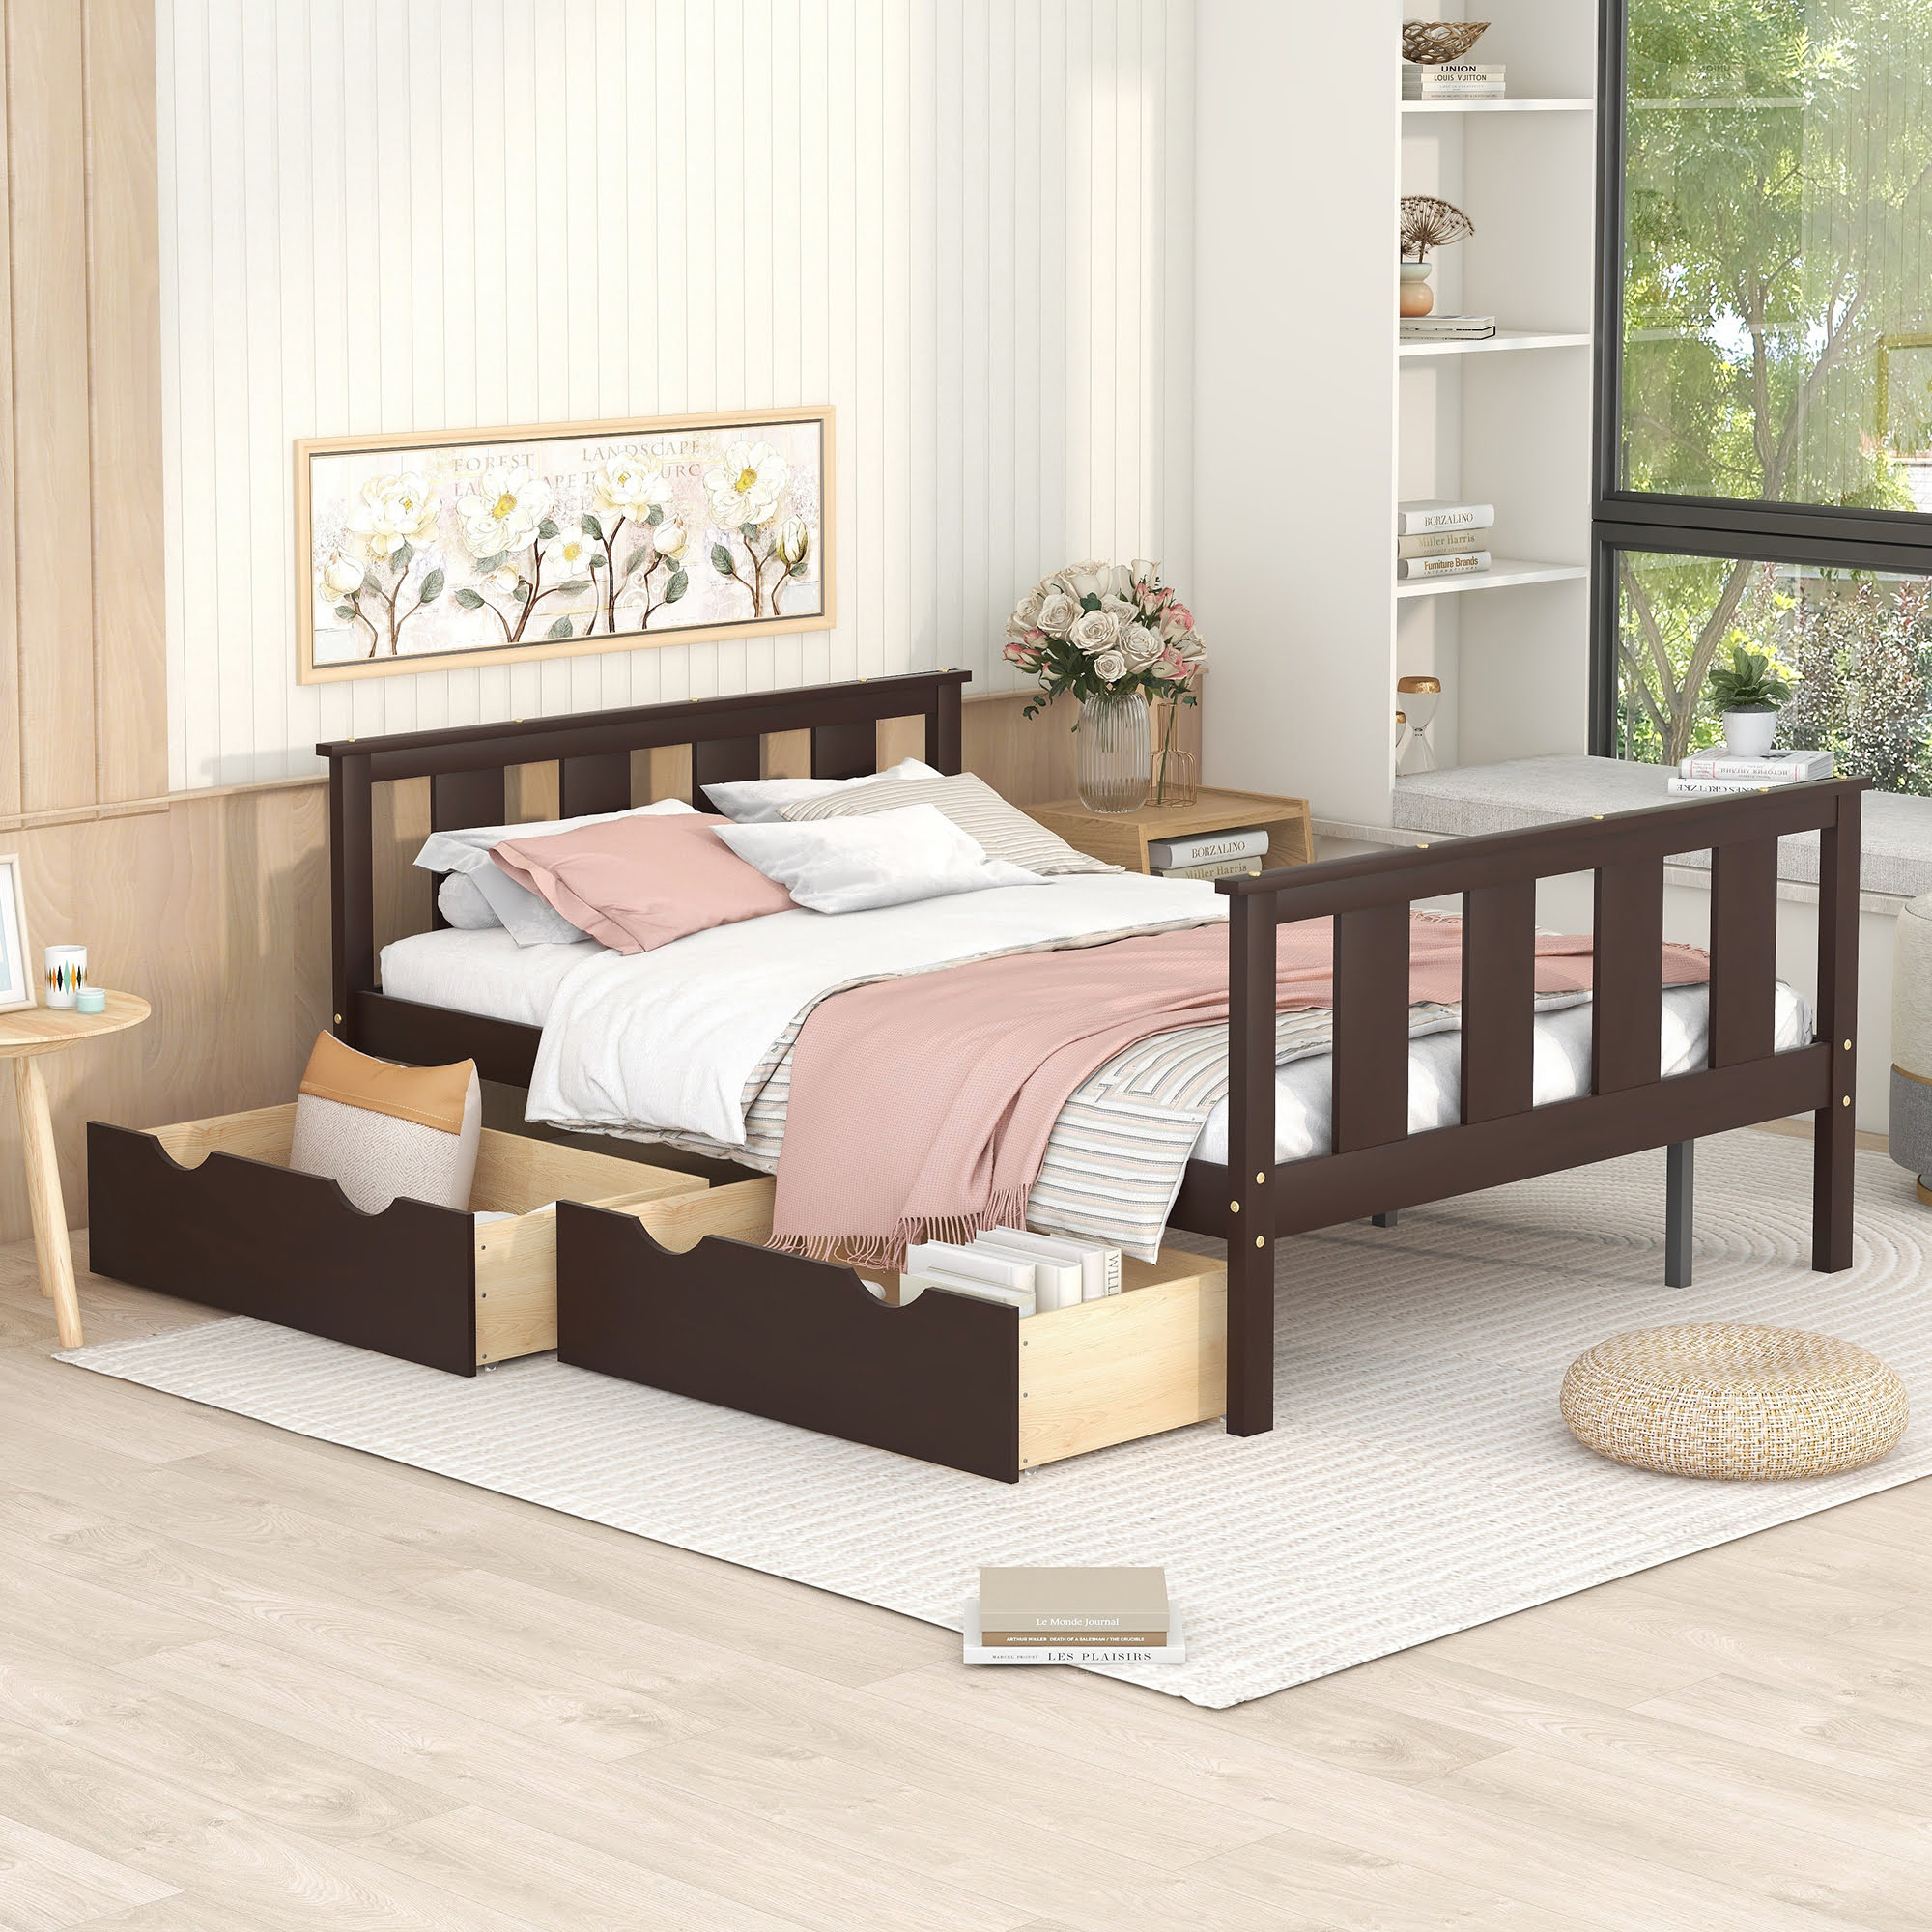 Wood Full Size Platform Bed With Storage Drawers